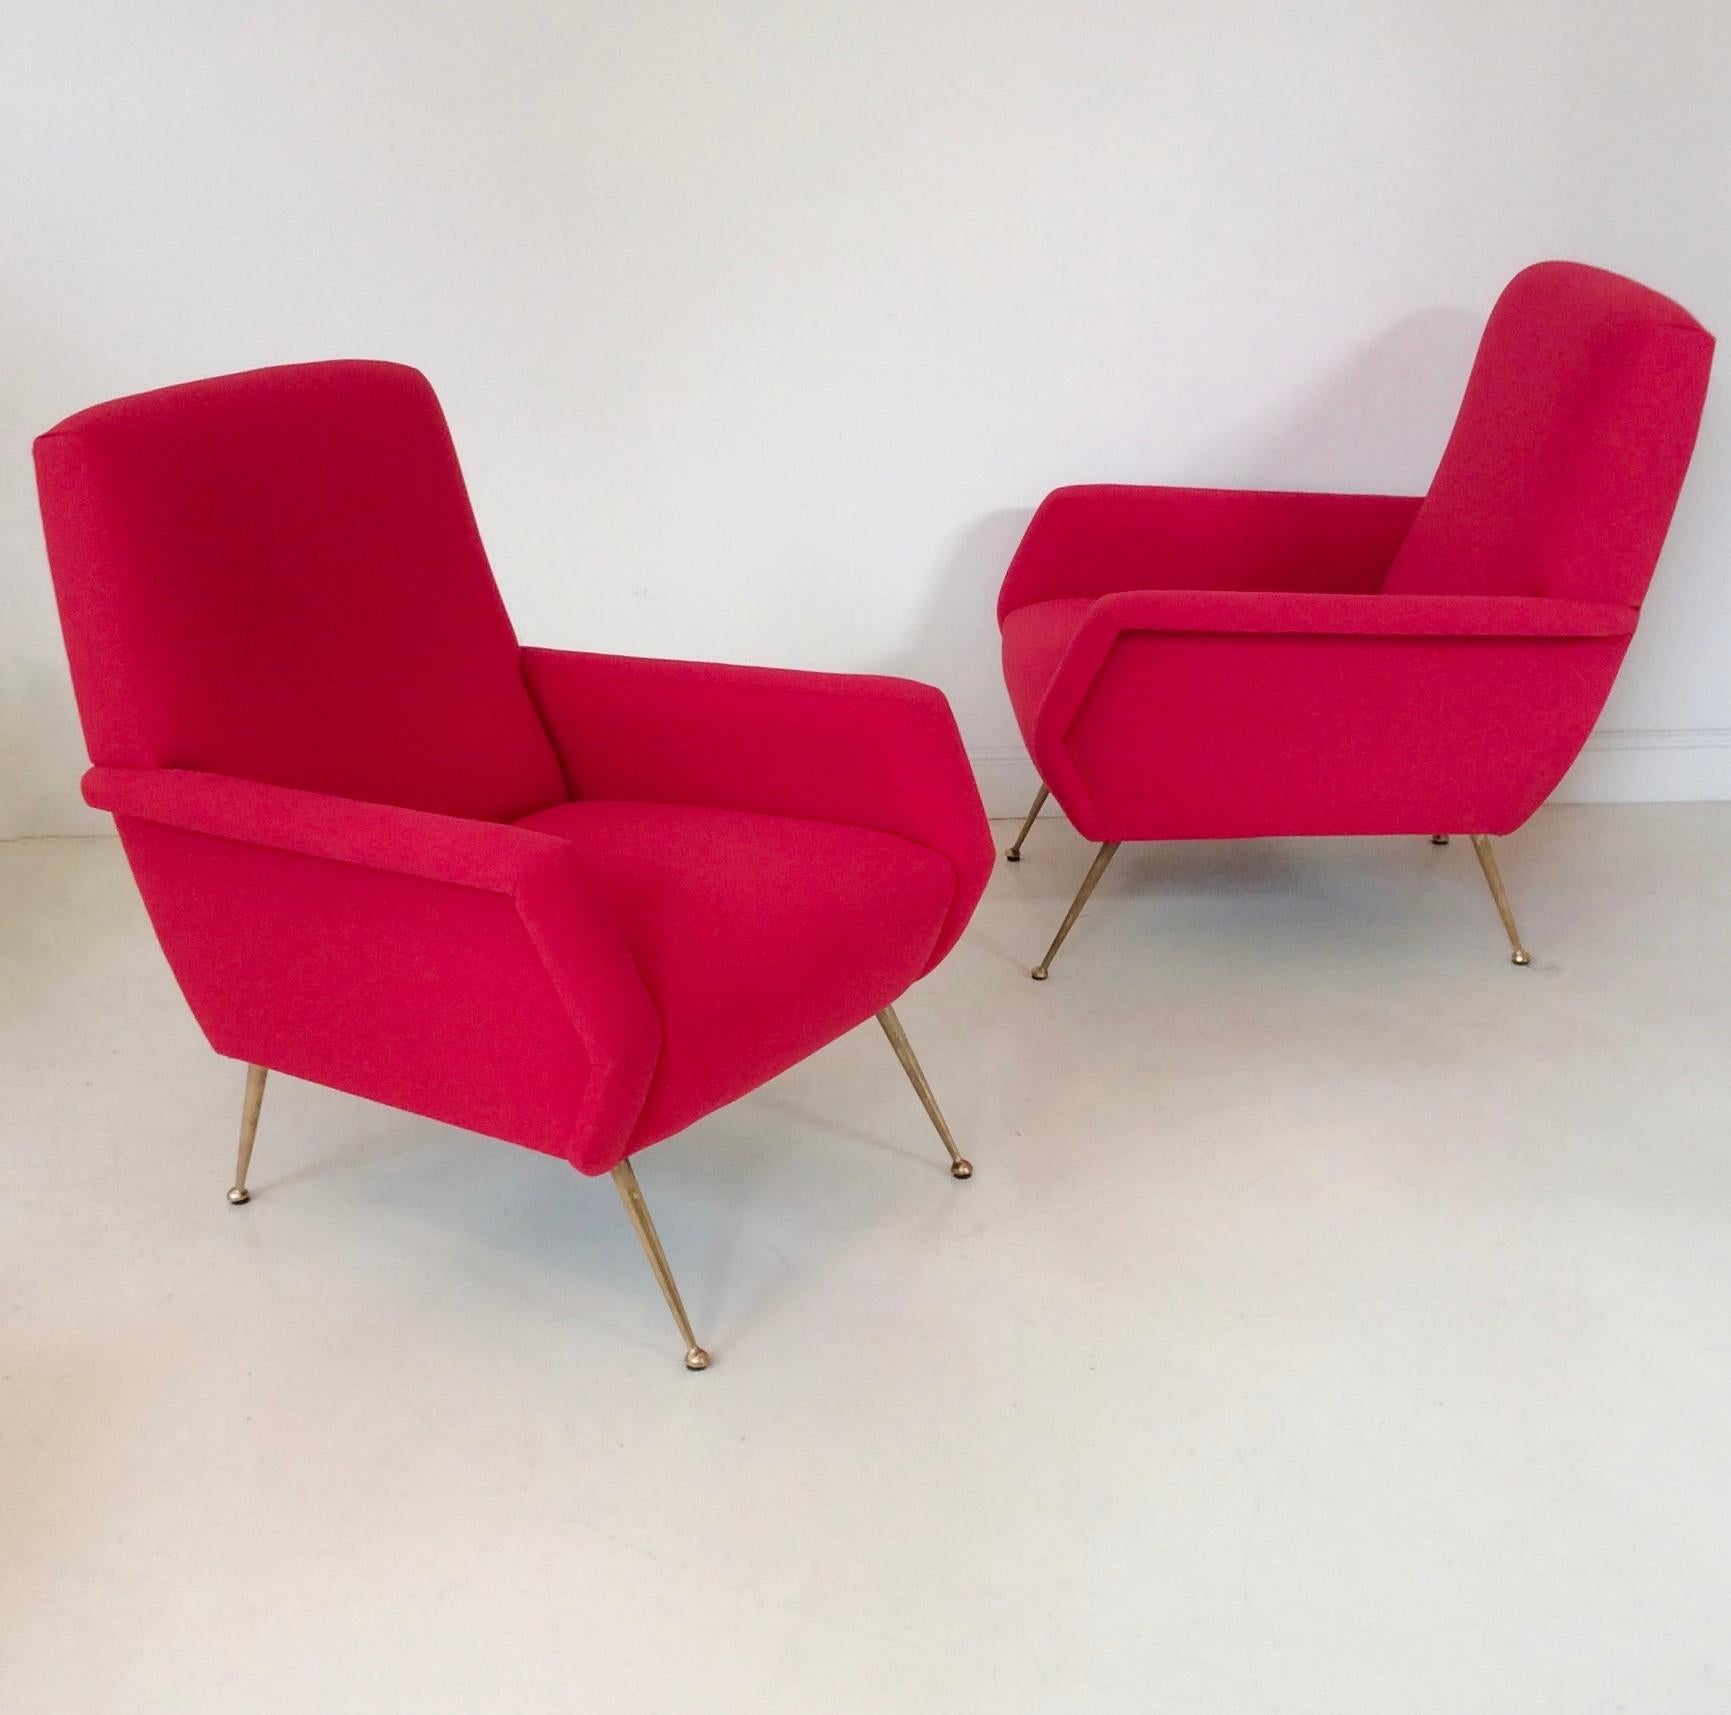 Mid-Century Modern Pair of Red Armchairs, circa 1950, Italy For Sale